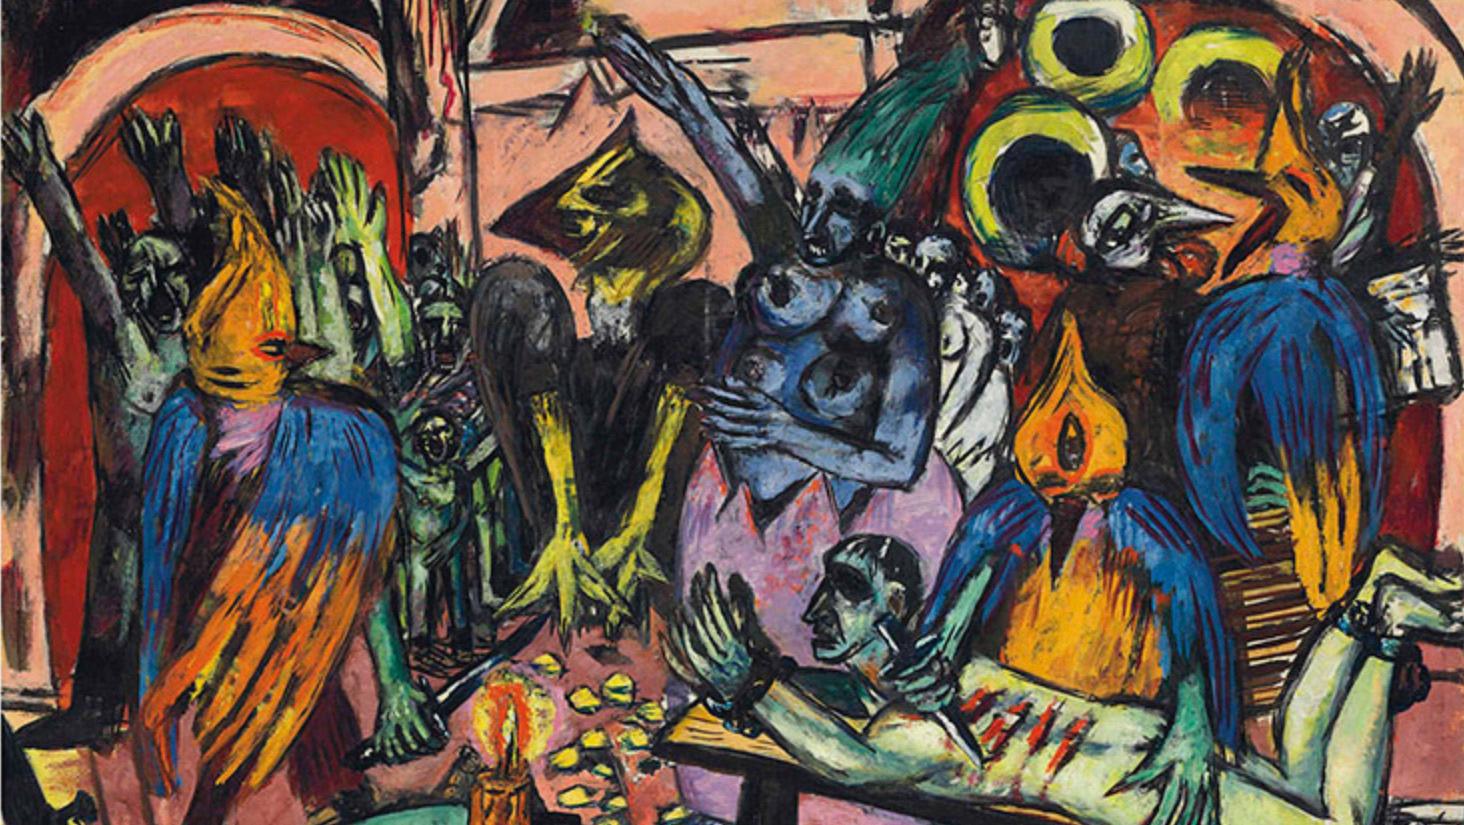 Beckmann's personal record is still held by Christie's London since they sold his... Max Beckmann: The Driving Force of the German Market